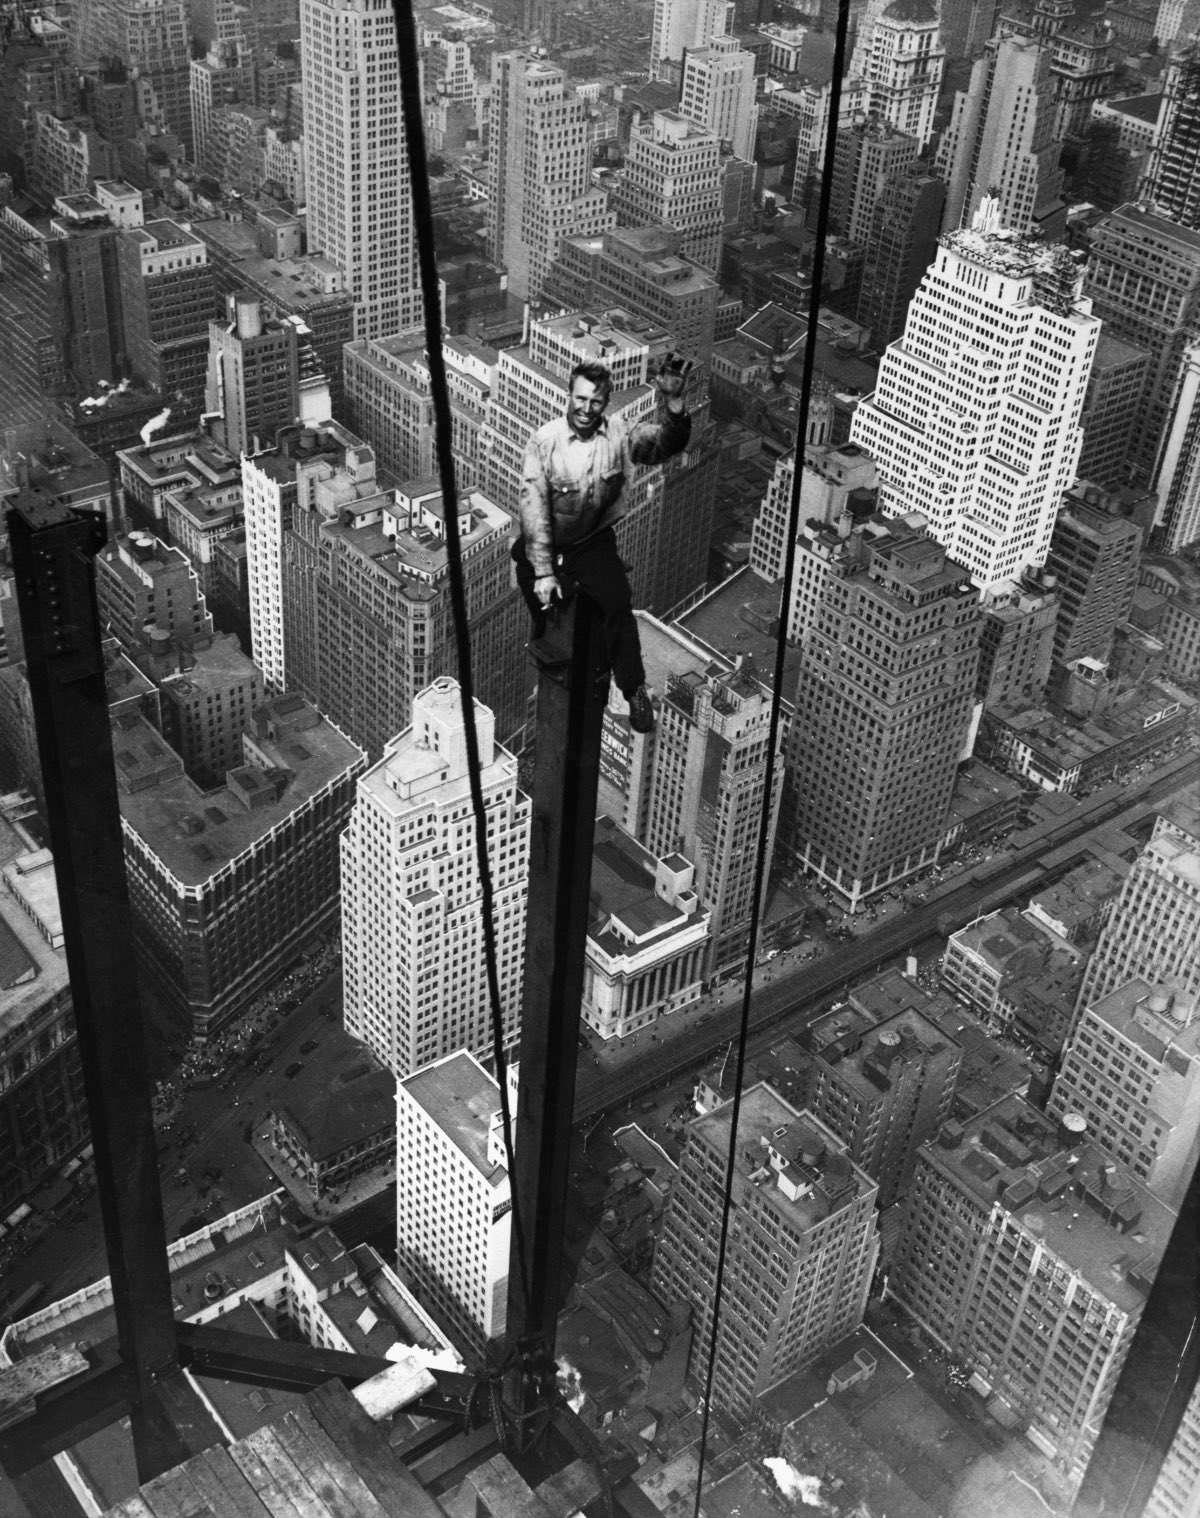 Carl Russell waves to his co-workers on the structural work of the 88th floor of the new Empire State Building.